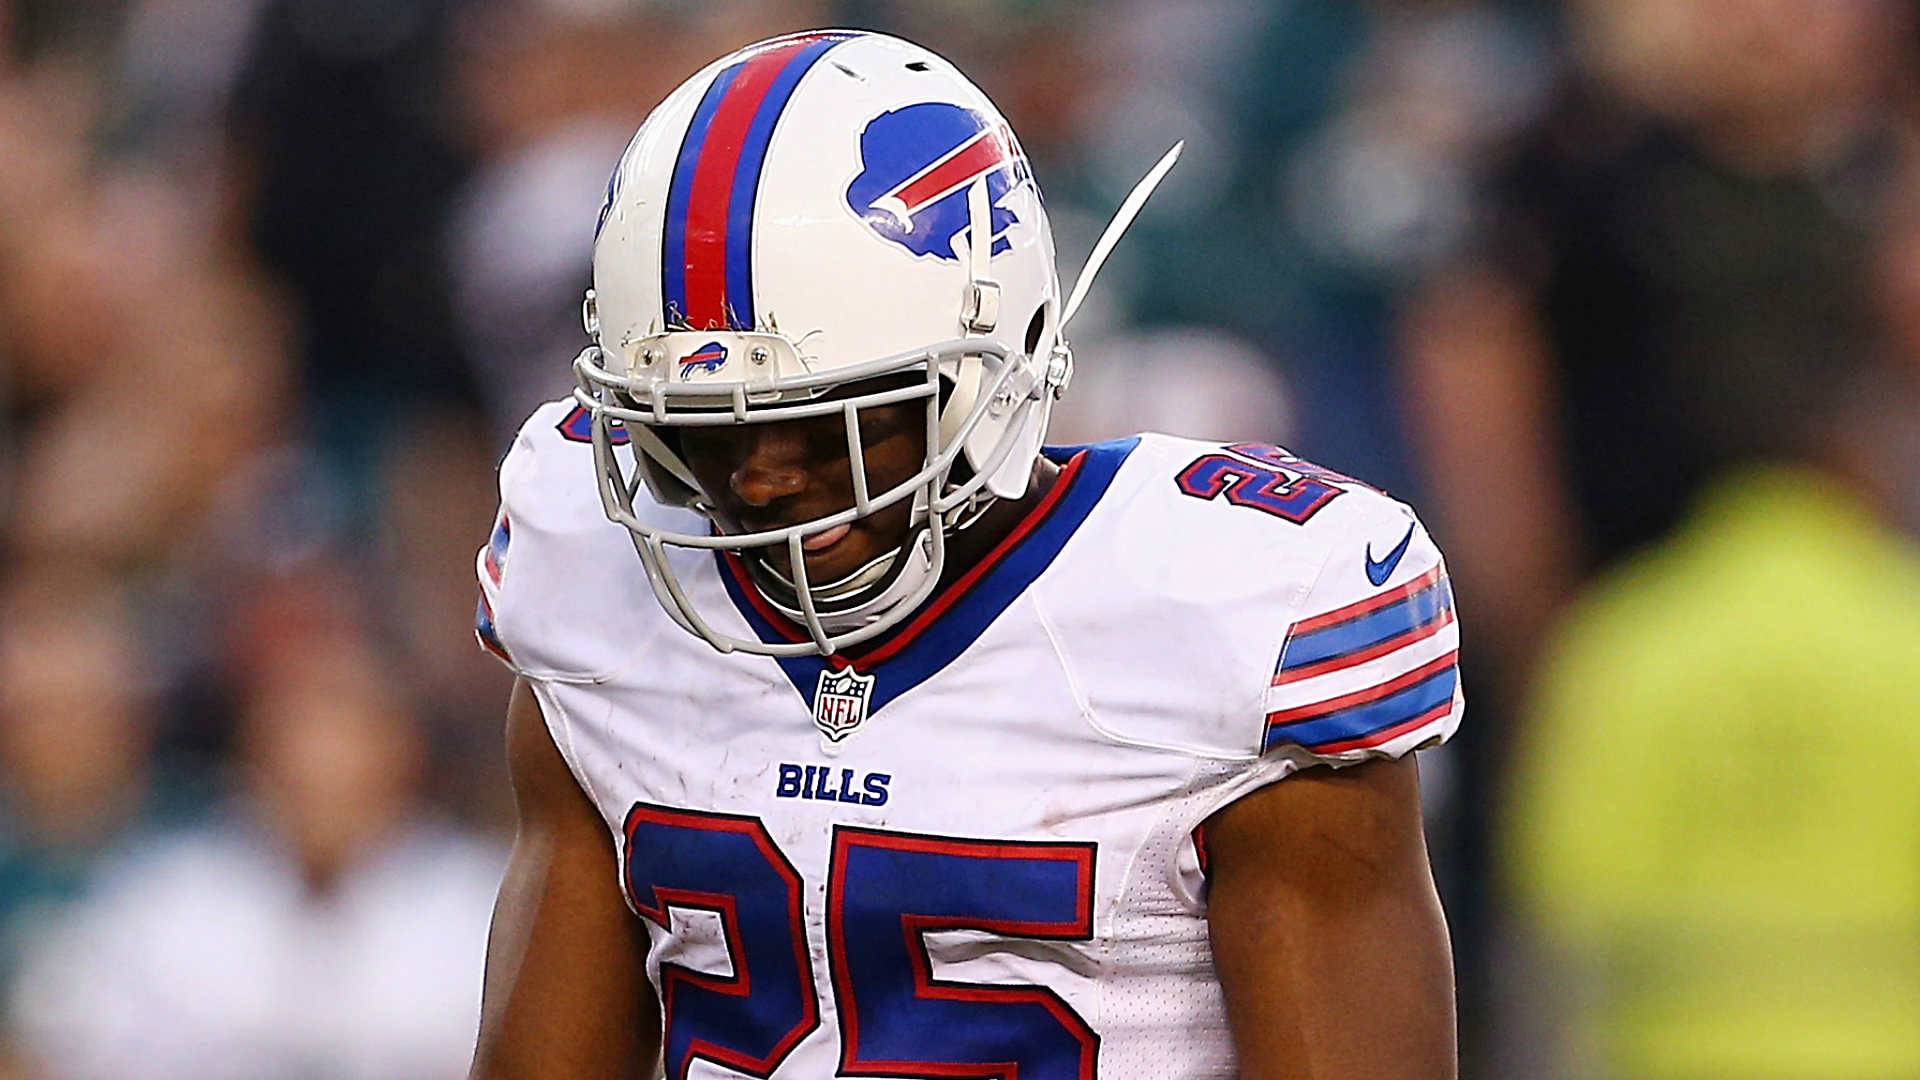 LeSean McCoy injury update: Bills RB fractured ribs vs. Chargers, report says